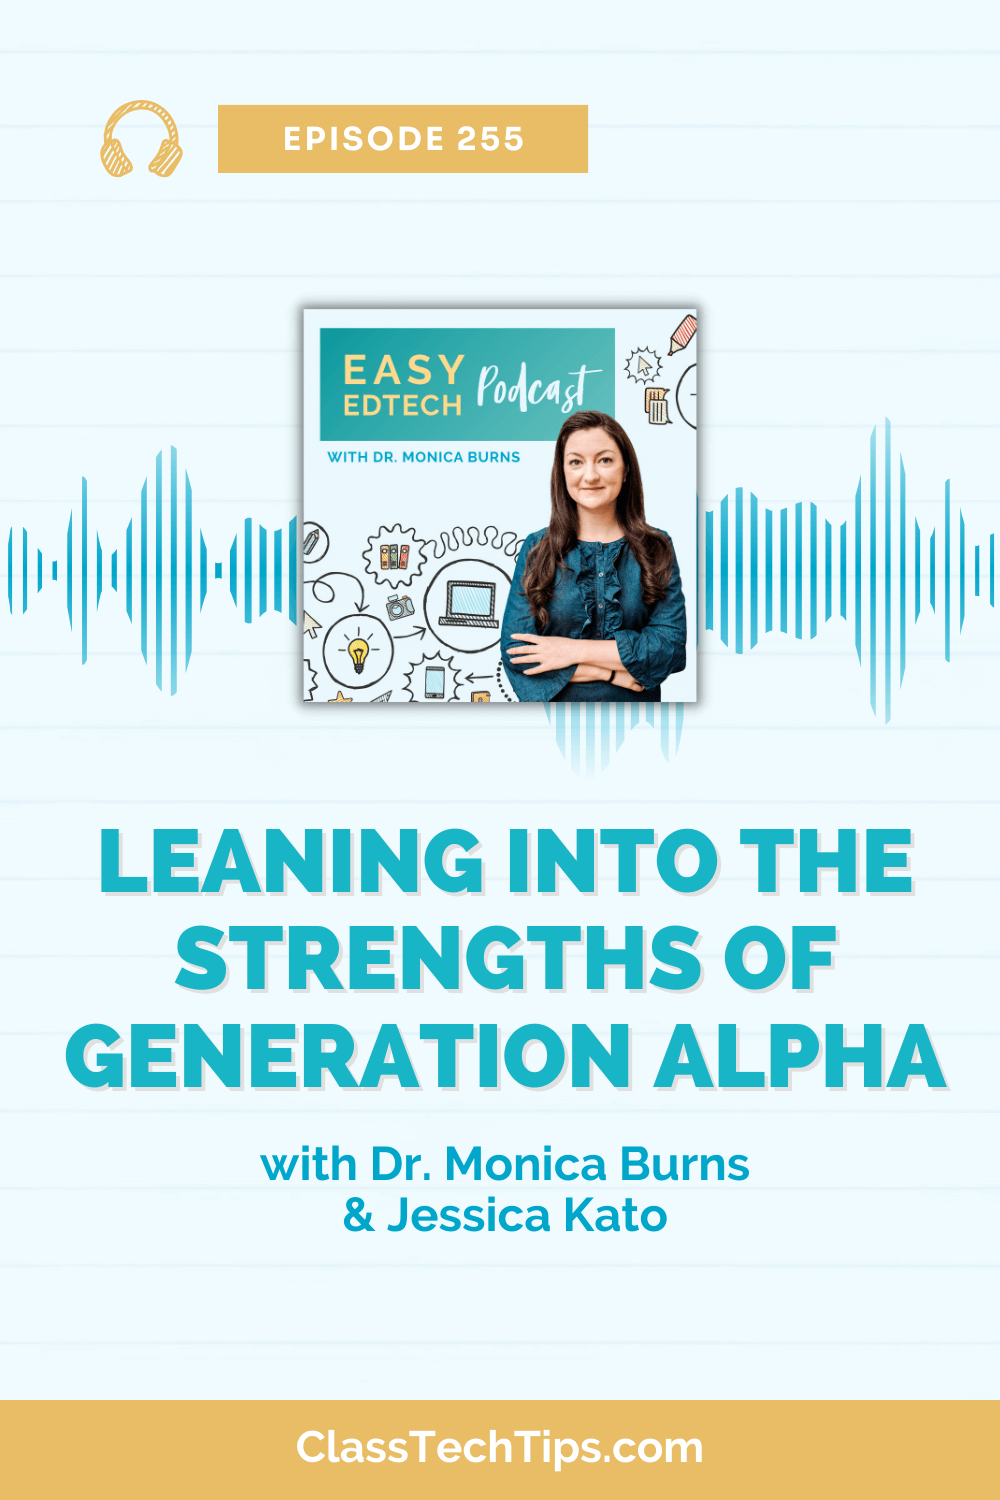 Promotional image for Easy EdTech Podcast episode 255, featuring a discussion titled "Leaning into the Strengths of Generation Alpha" with Dr. Monica Burns and Jessica Kato. The visual shows a smiling woman in a denim shirt, with her hand on her hip, against a background of hand-drawn educational icons and podcast symbols.